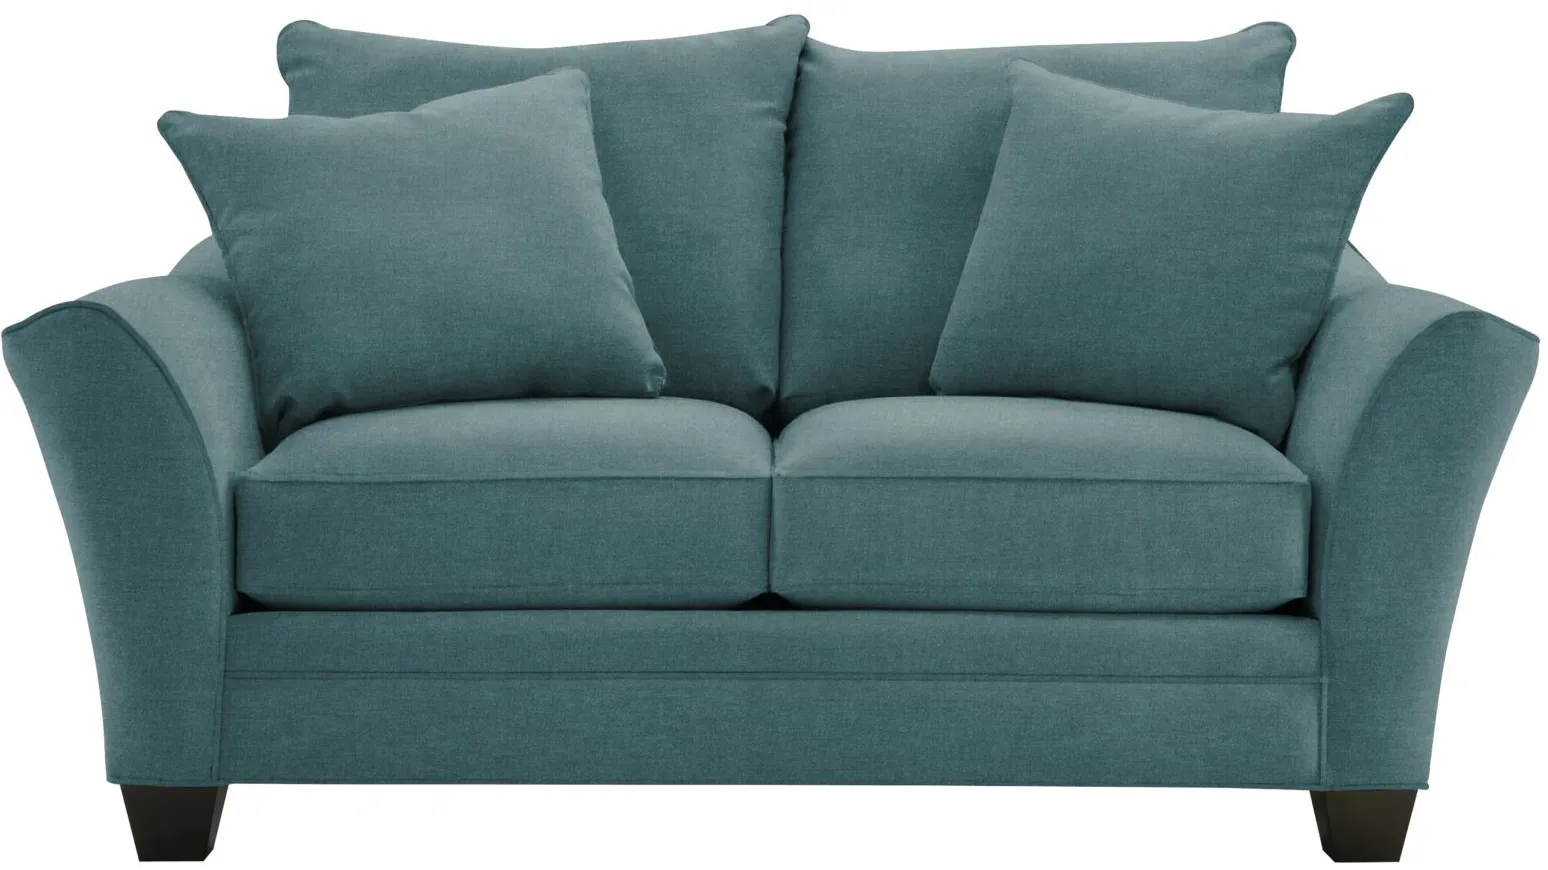 Briarwood Loveseat in Santa Rosa Turquoise by H.M. Richards